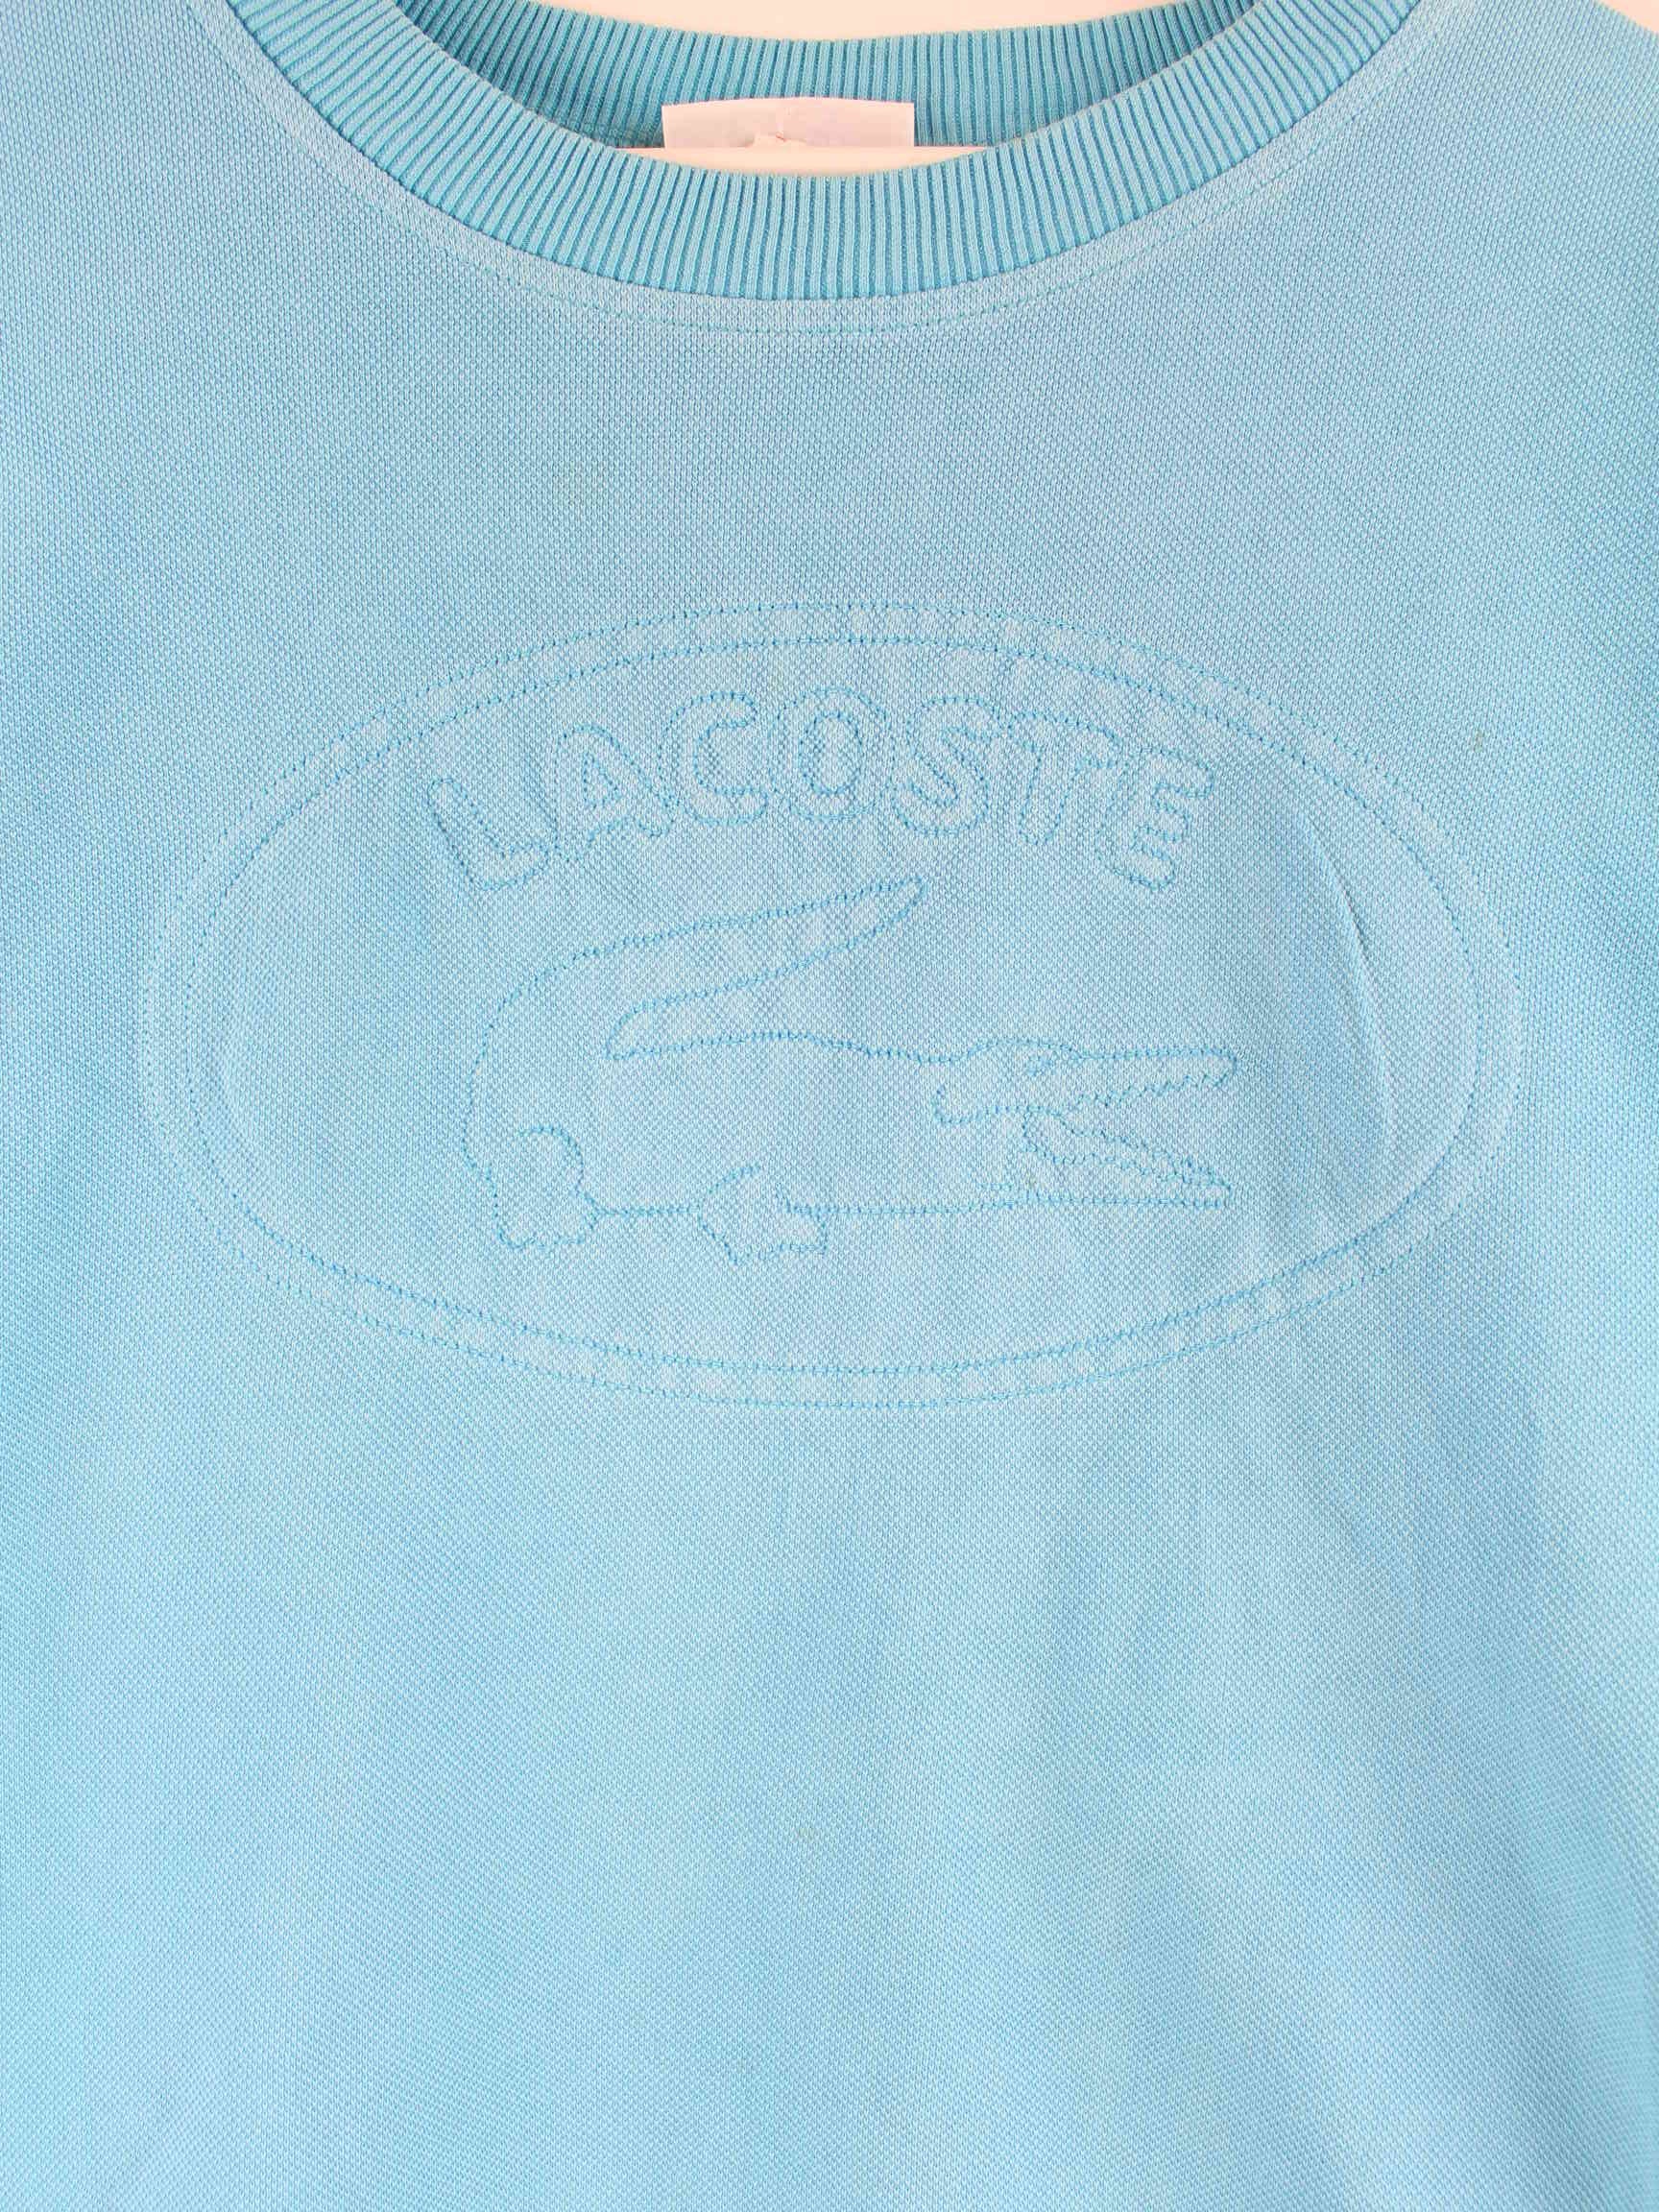 Lacoste 90s Vintage Embroidered Sweater Blau M (detail image 1)